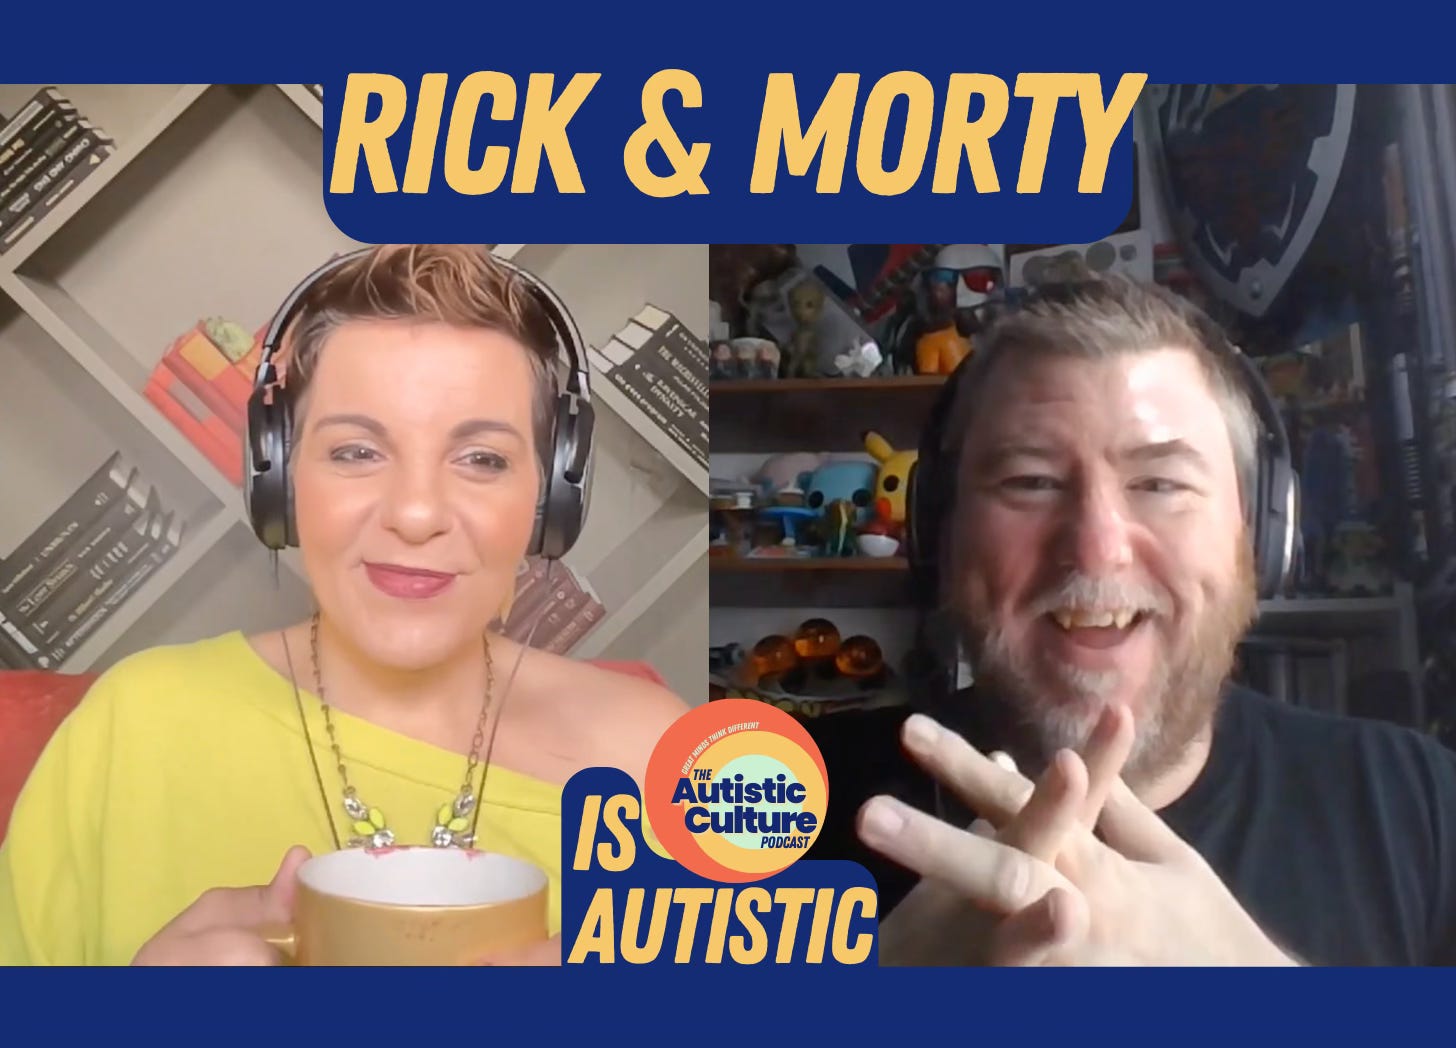 Rick and Morty is Autistic (Episode 70)